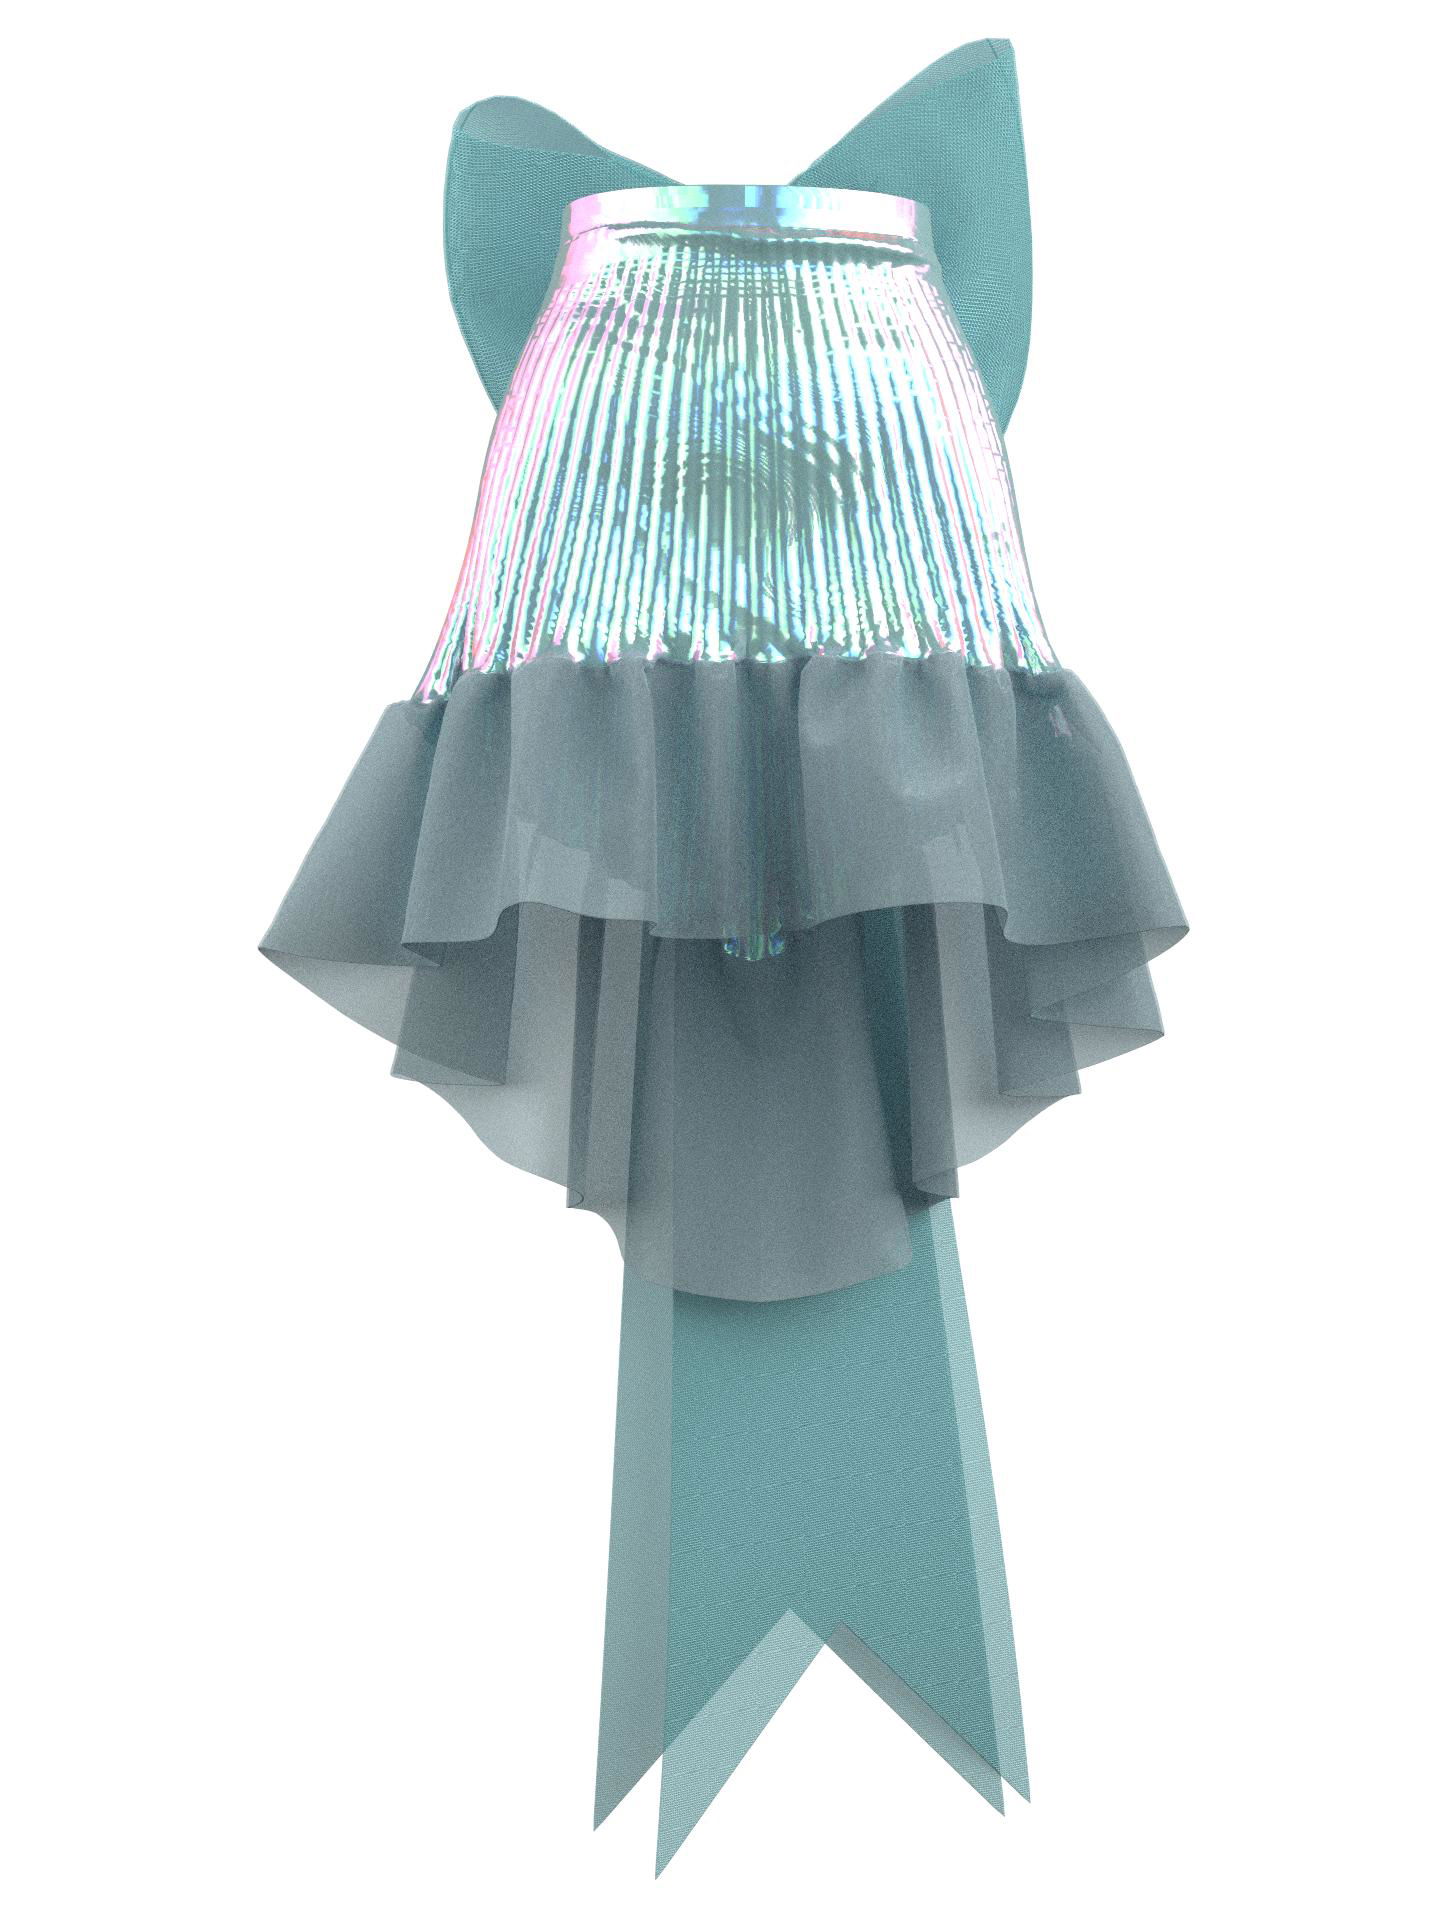 Holographic Ruffle Skirt by SRITAOZ